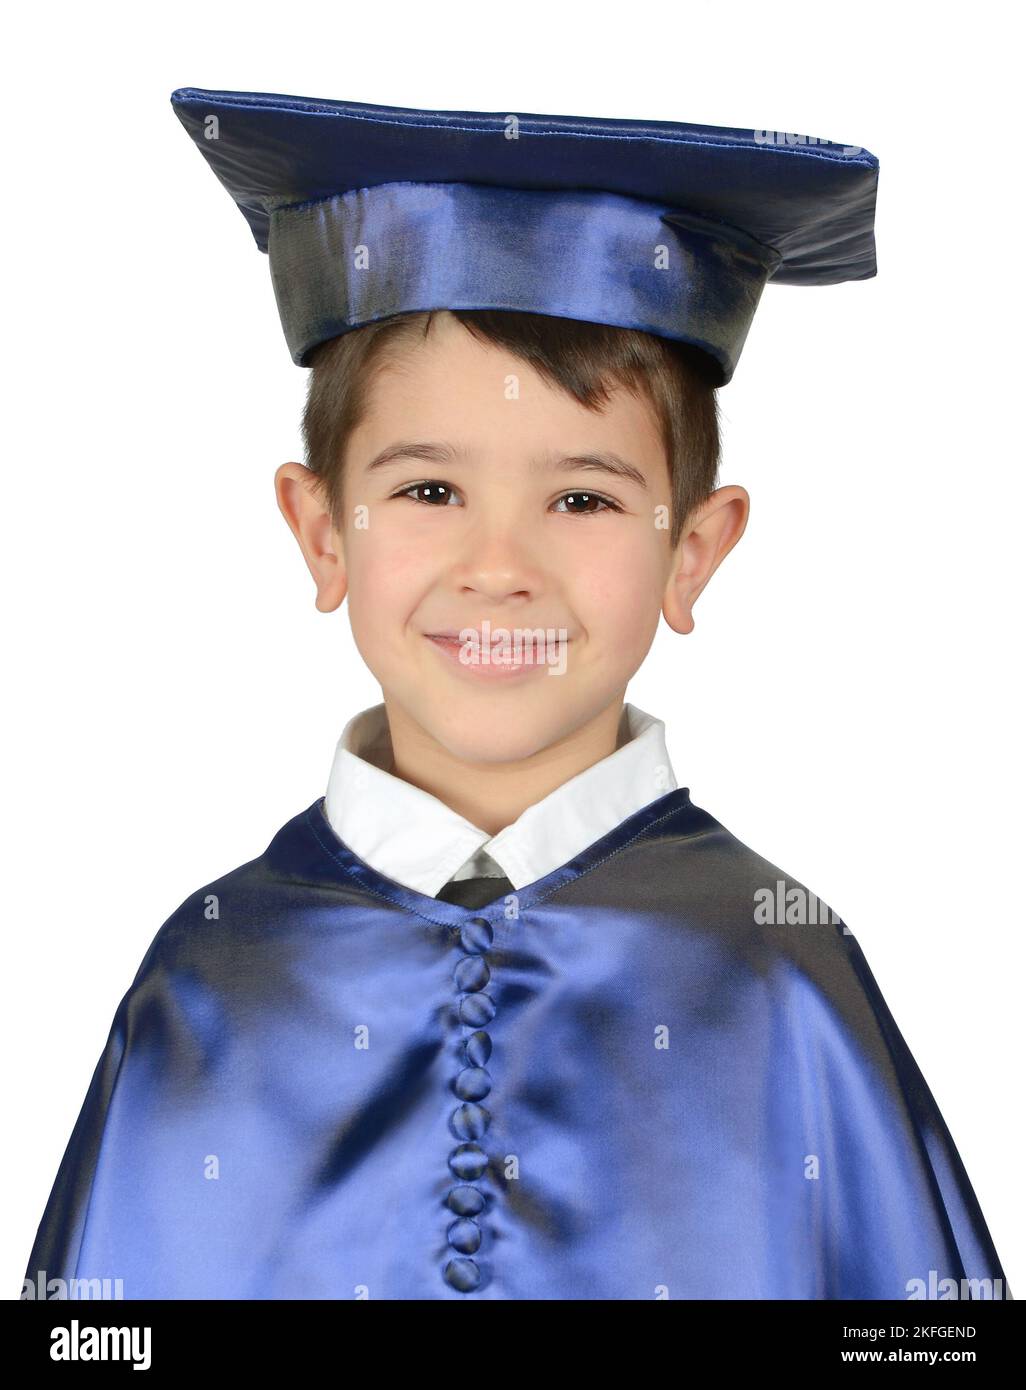 Smiling school-age boy in blue cap and gown Stock Photo